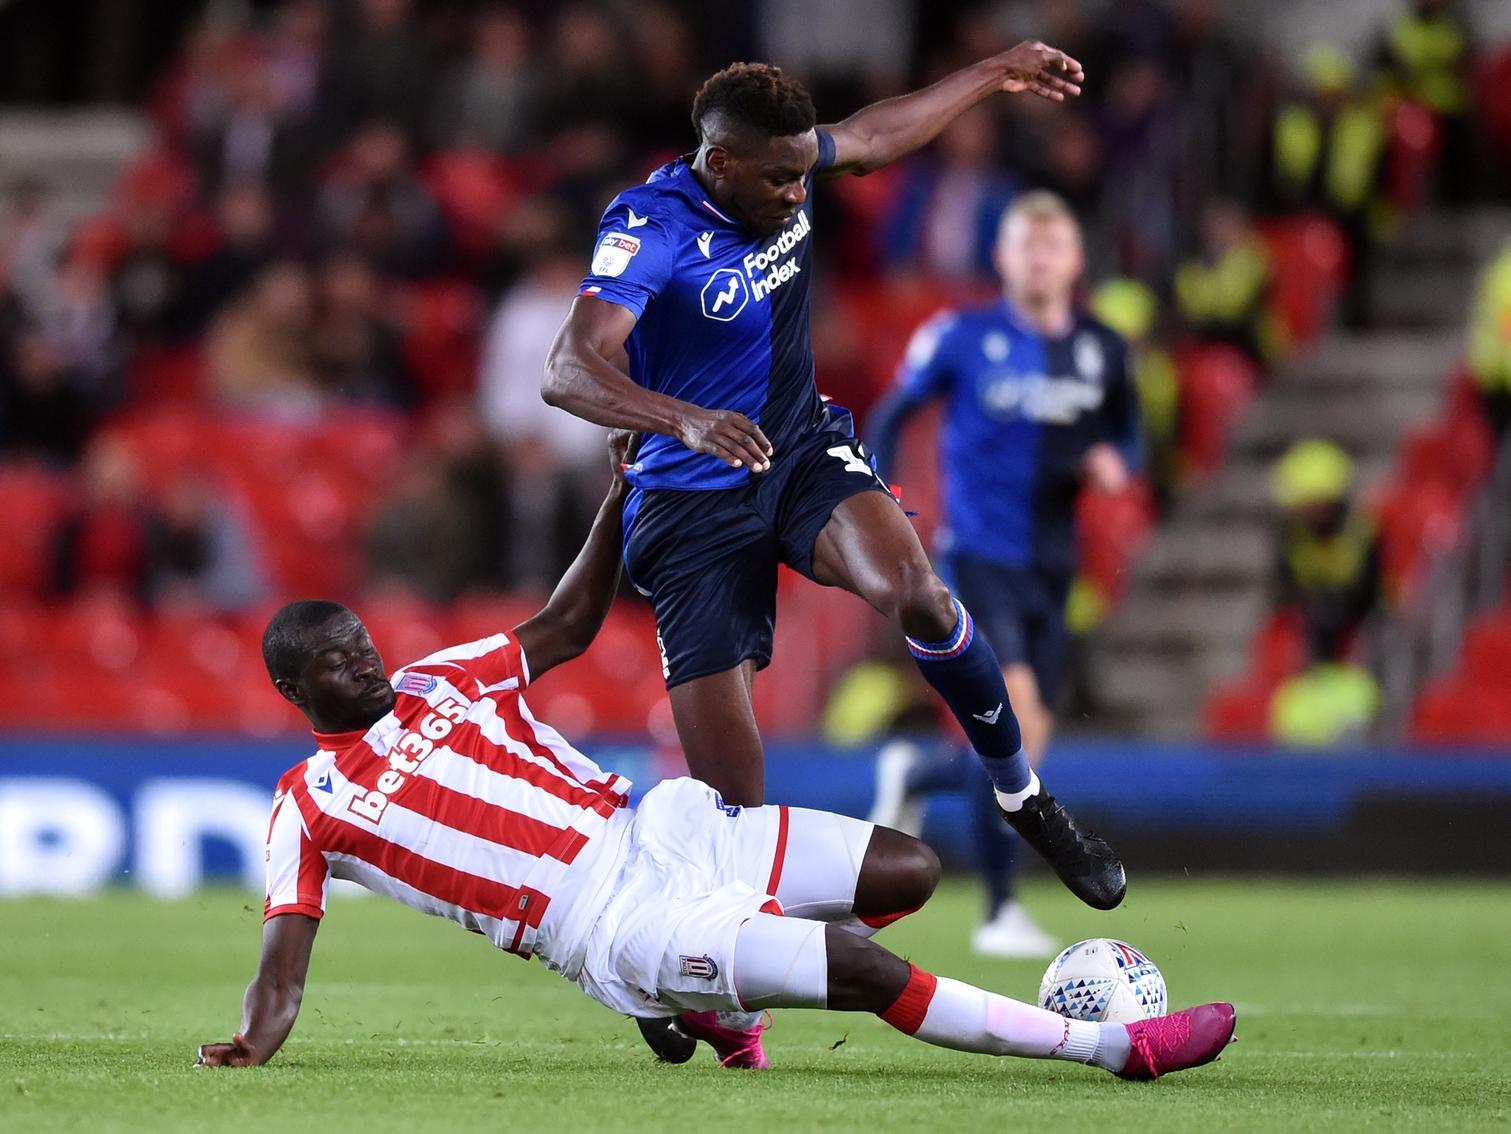 Turkish side Trabzonspor have emerged as rivals to Galatasaray to sign Stoke City midfielder Badou Ndiaye, as interest continues to grow in the Senegal international. (Sport Witness)